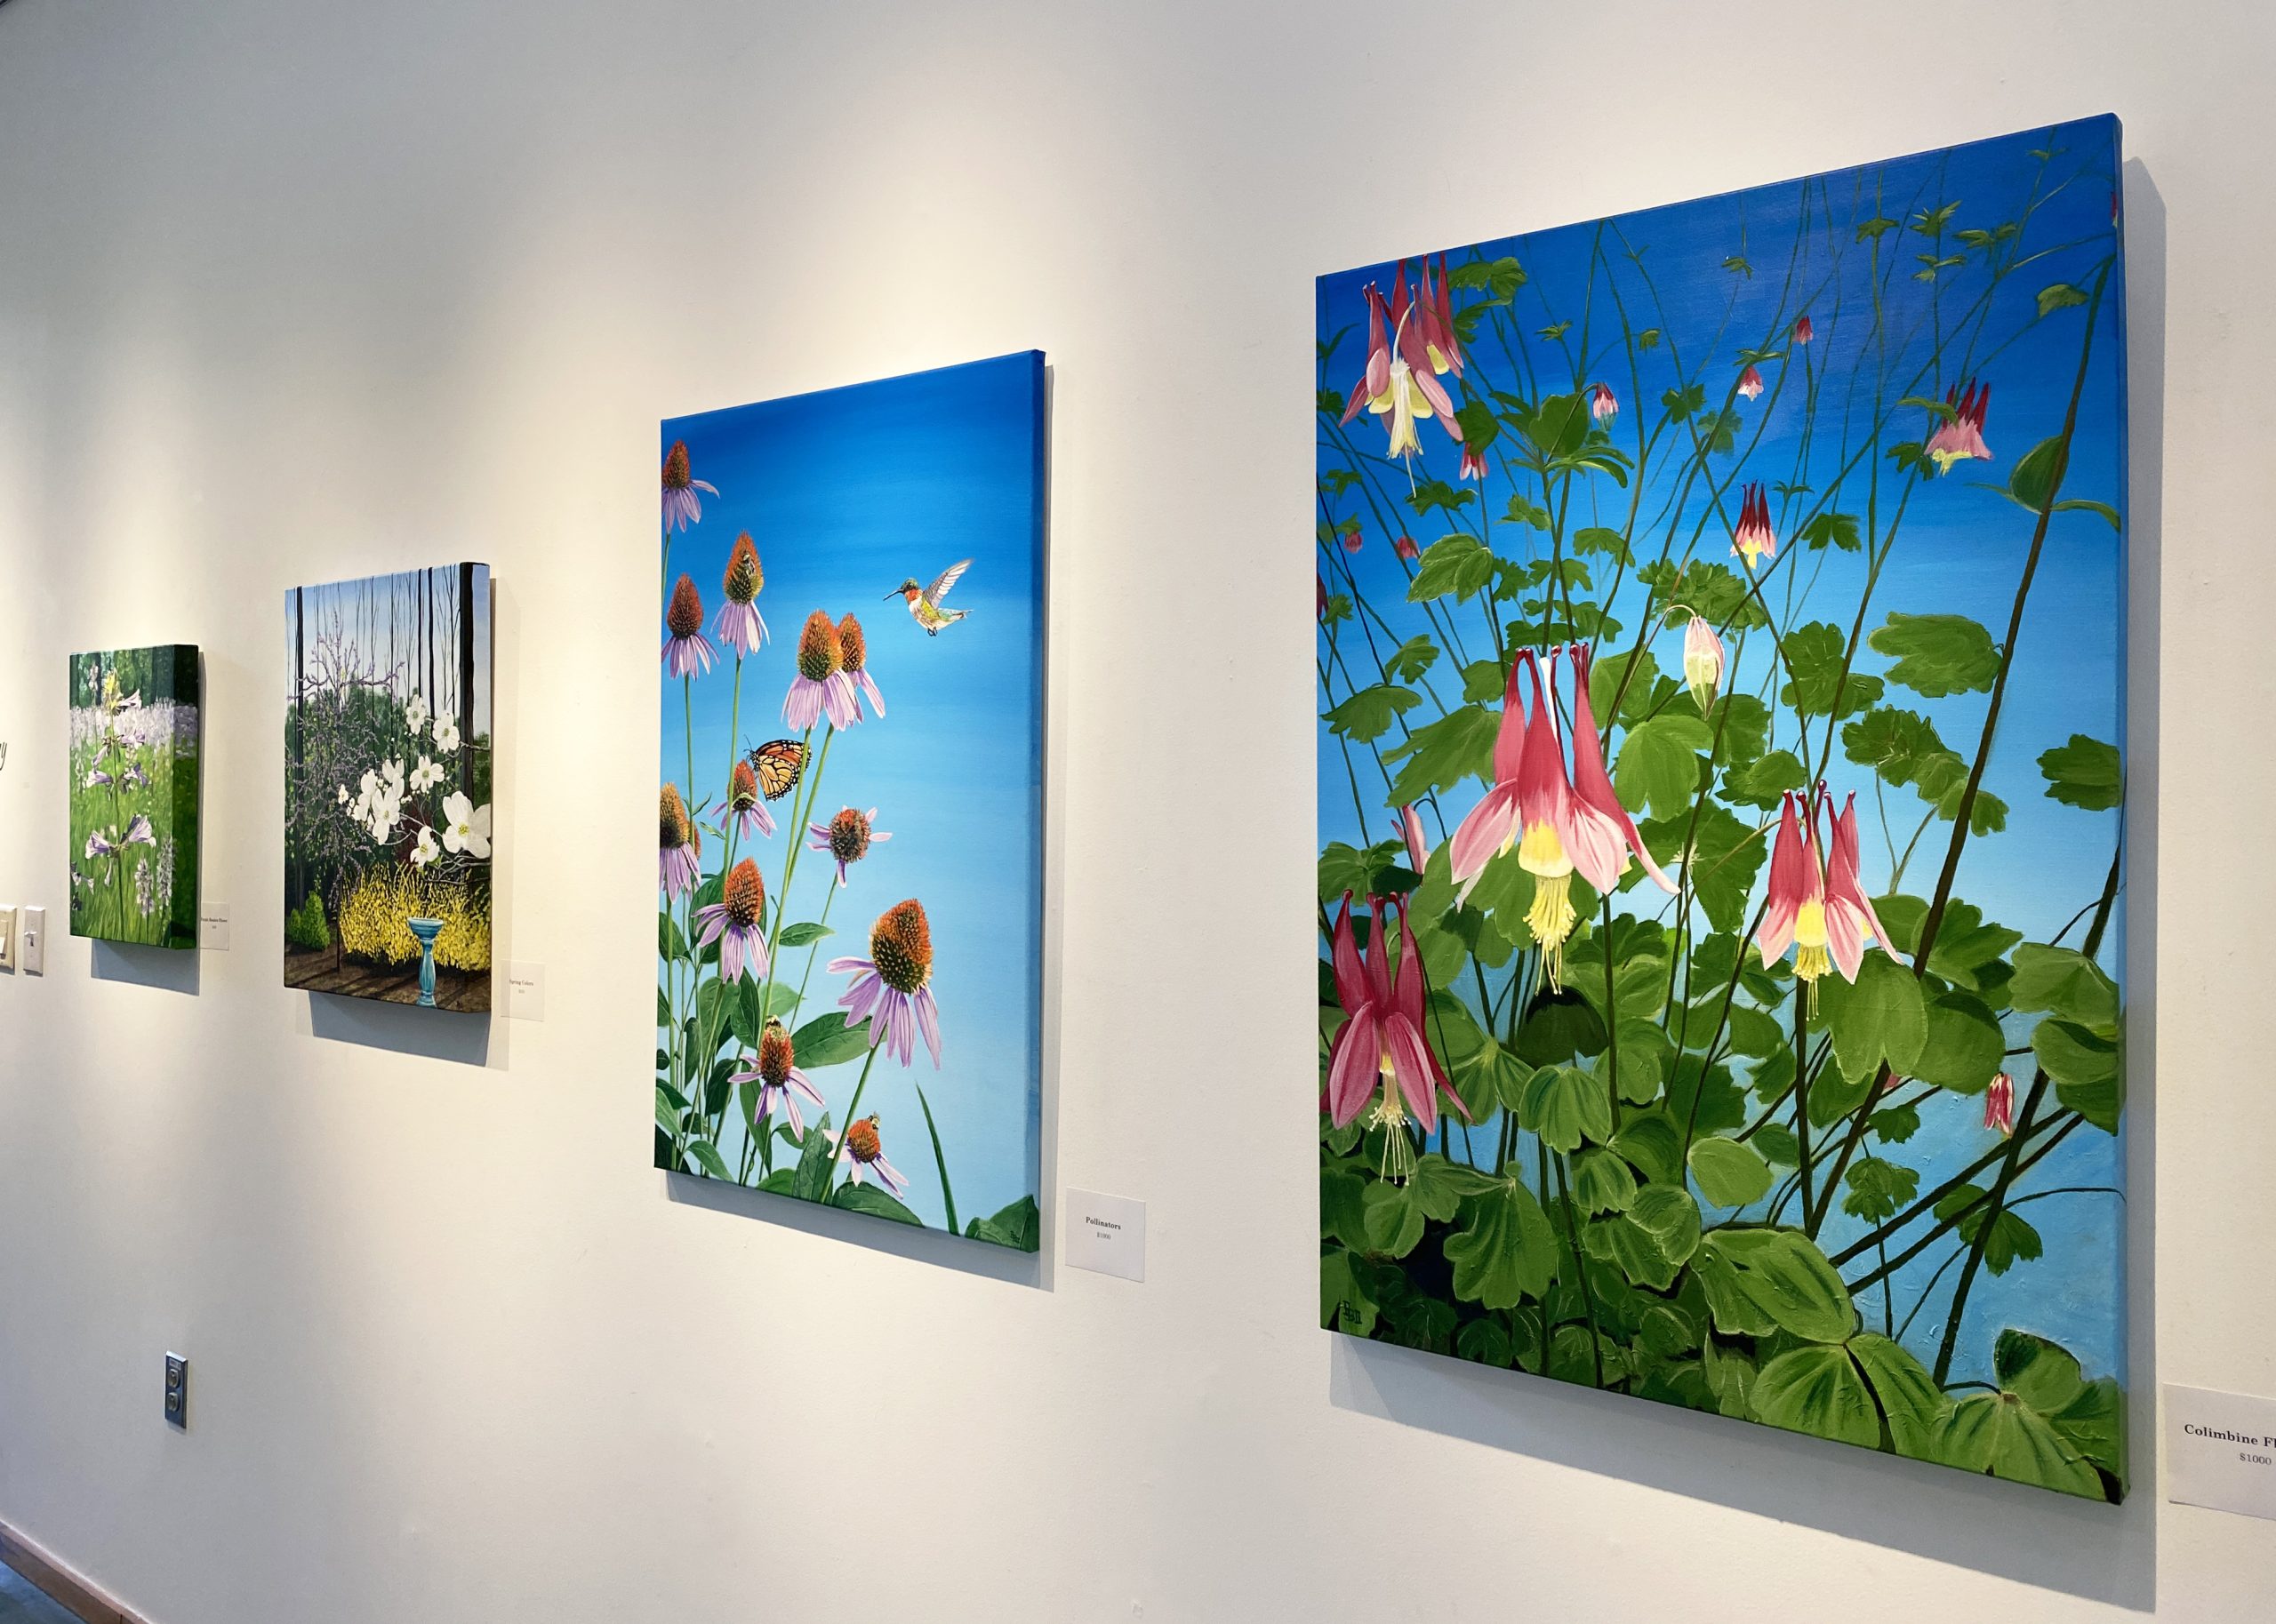 Acrylic paintings of columbine, coneflower, and other native plants by Boots Quimby hang in the DeBerry Gallery.